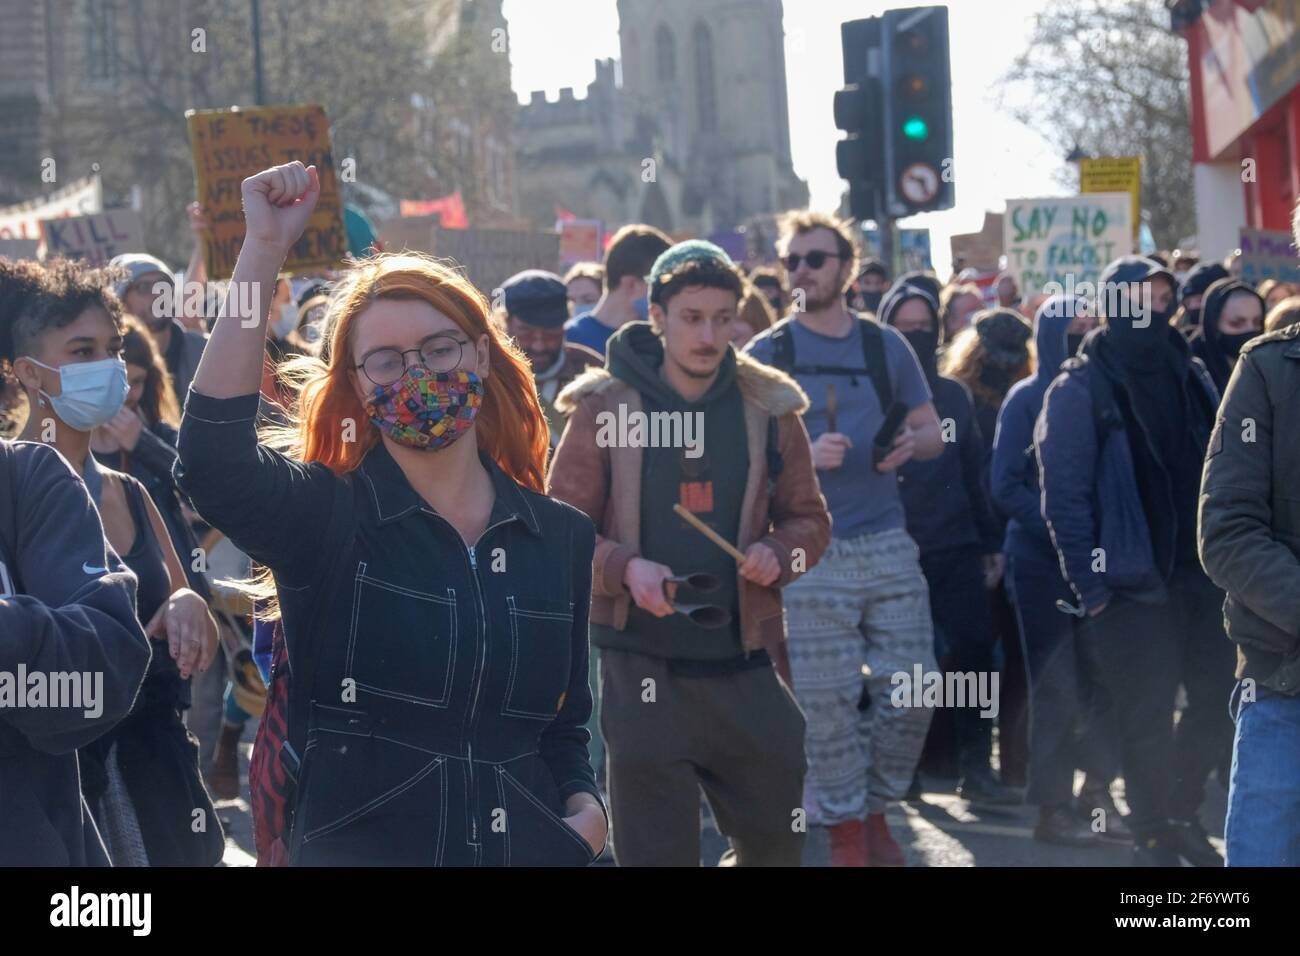 College Green, Bristol, UK. 3rd Apr, 2021. Members of the public gather on College Green to express discontent with the Governments changes to the right to protest. This will be the fifth protest in Bristol in recent weeks. Credit: JMF News/Alamy Live News Stock Photo